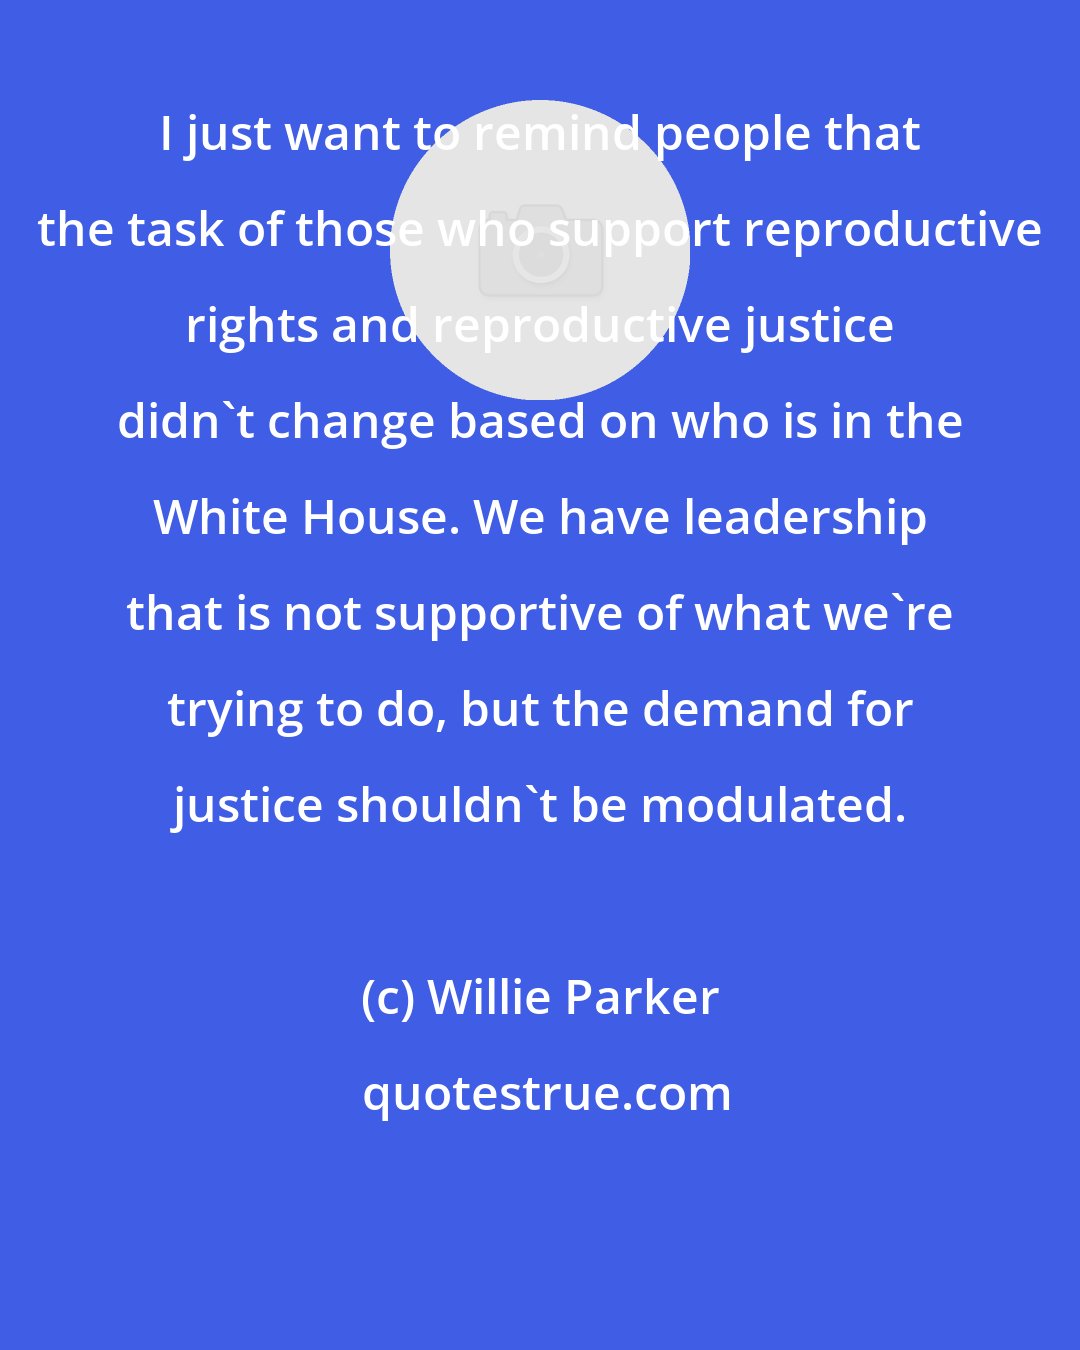 Willie Parker: I just want to remind people that the task of those who support reproductive rights and reproductive justice didn't change based on who is in the White House. We have leadership that is not supportive of what we're trying to do, but the demand for justice shouldn't be modulated.